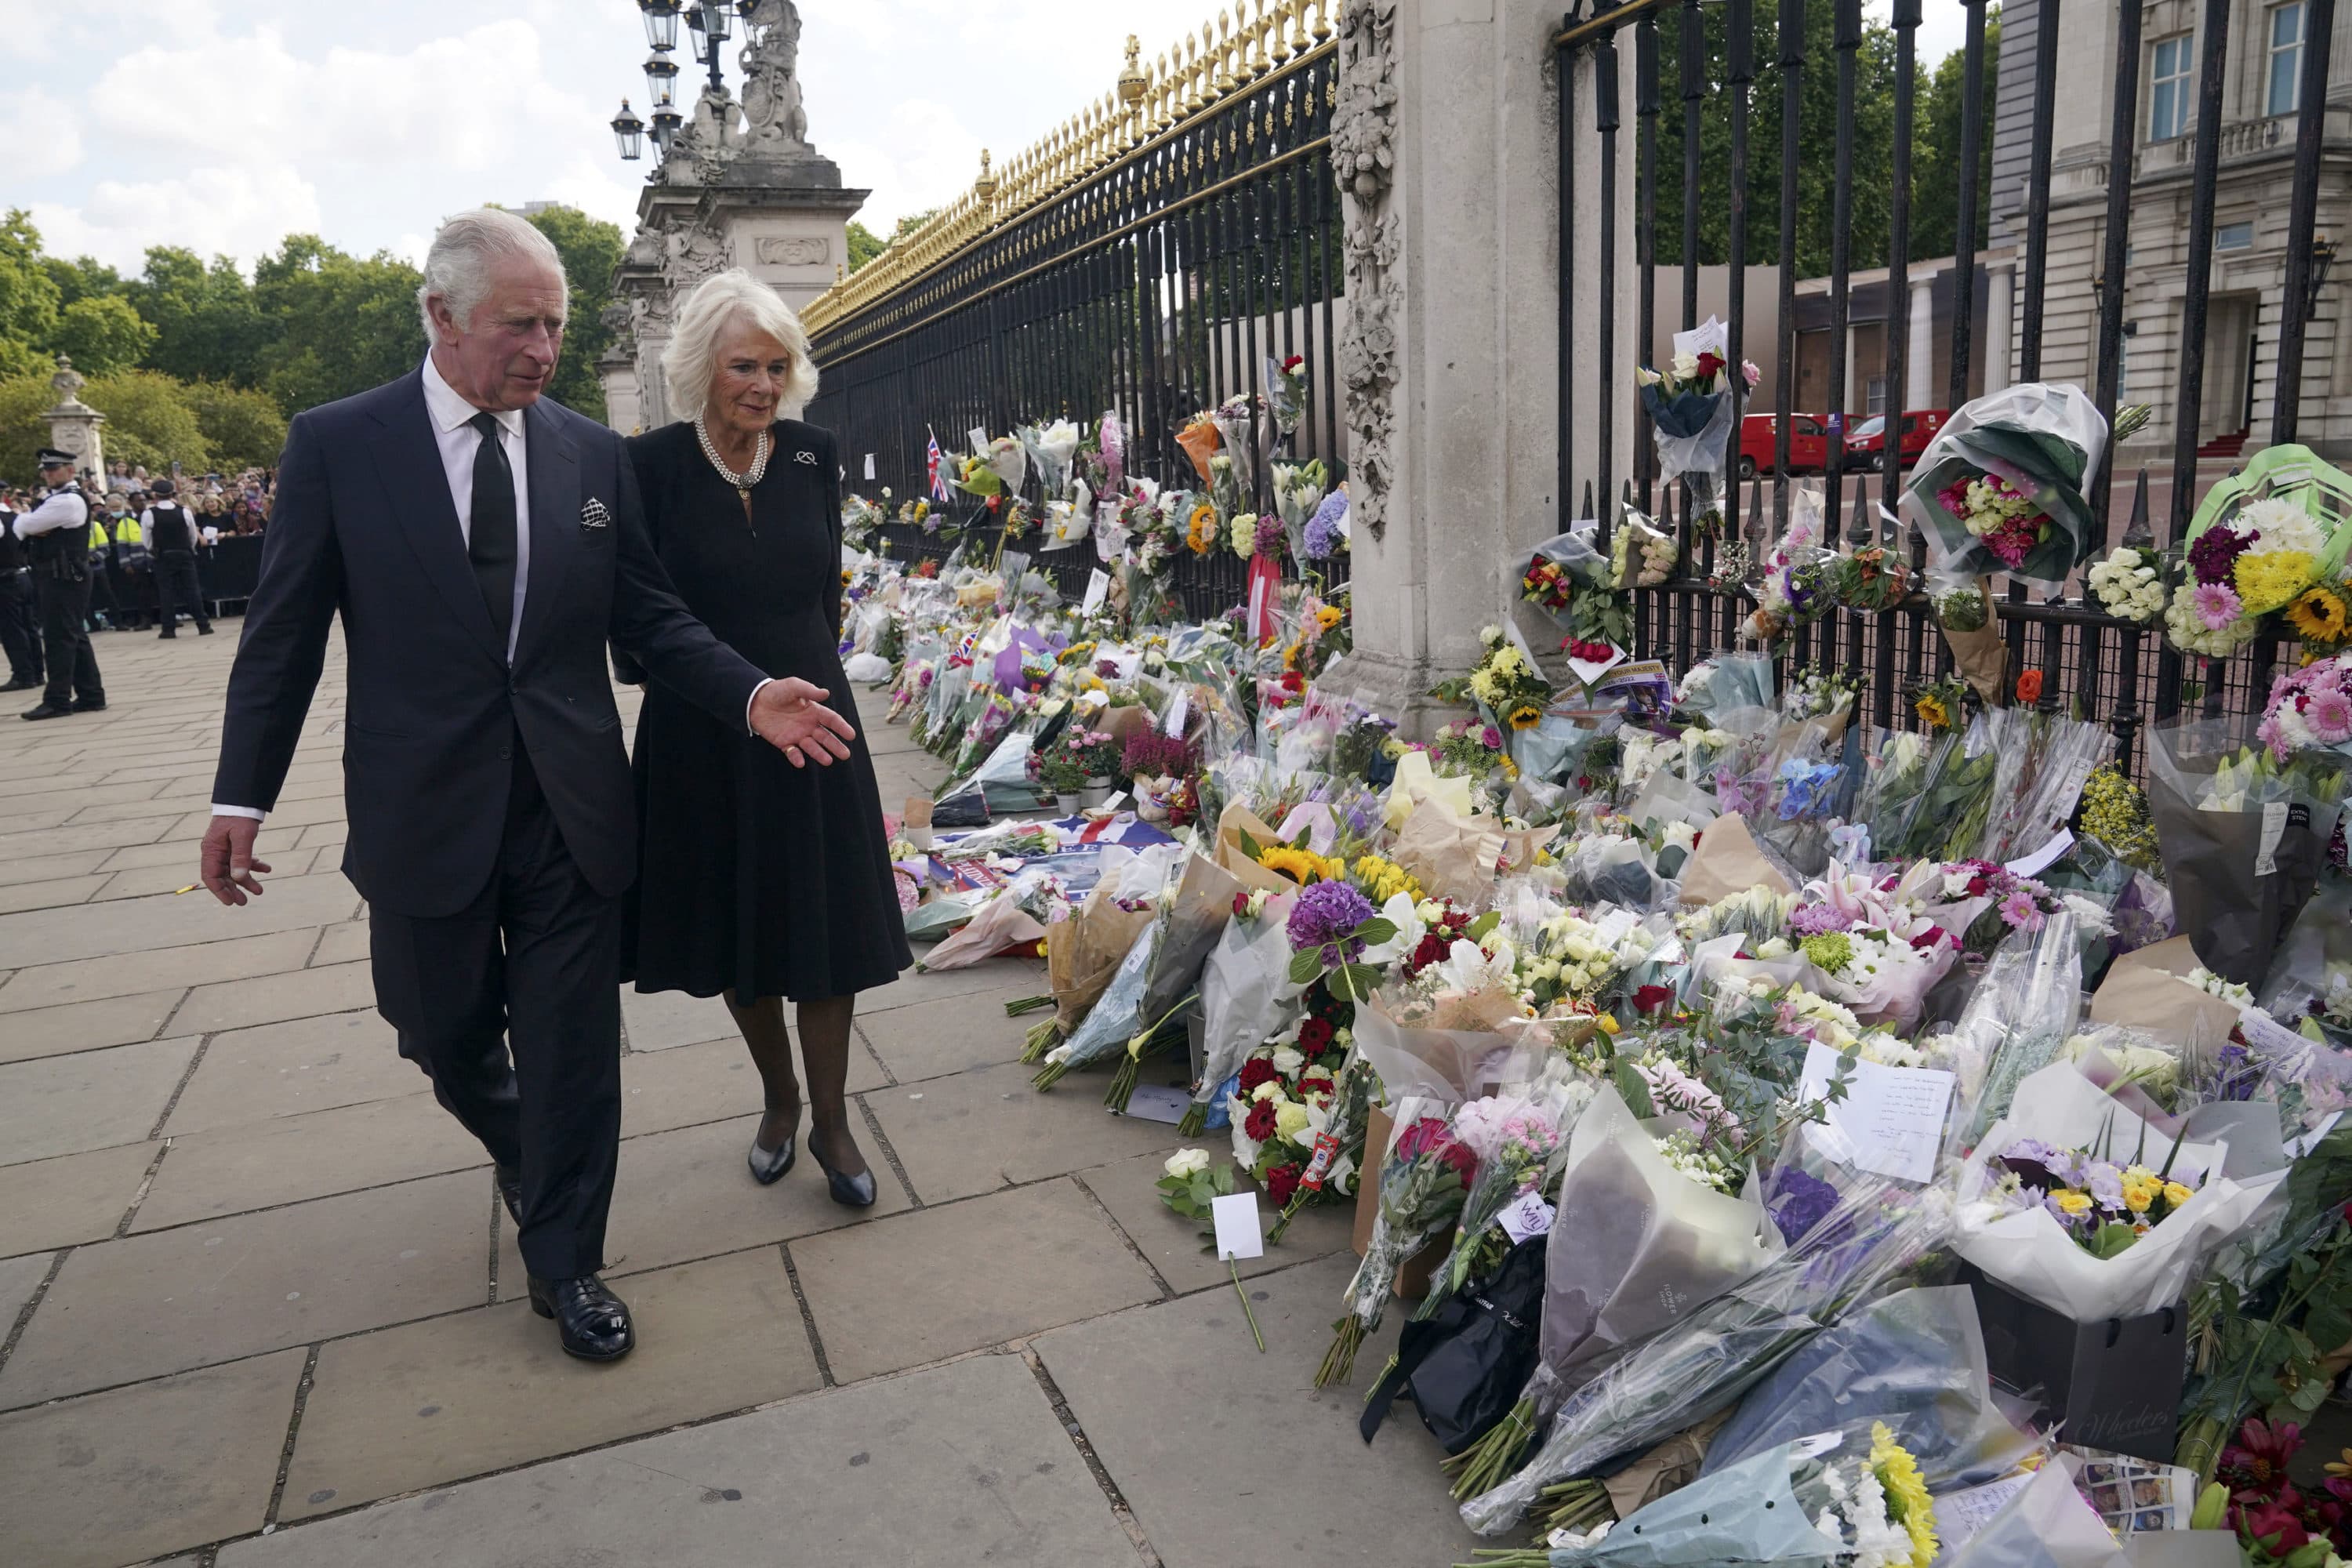 Britain's King Charles III, left, and Camilla, the Queen Consort, look at floral tributes outside Buckingham Palace following Thursday's death of Queen Elizabeth II, in London, Sept. 9. (Yui Mok/AP)